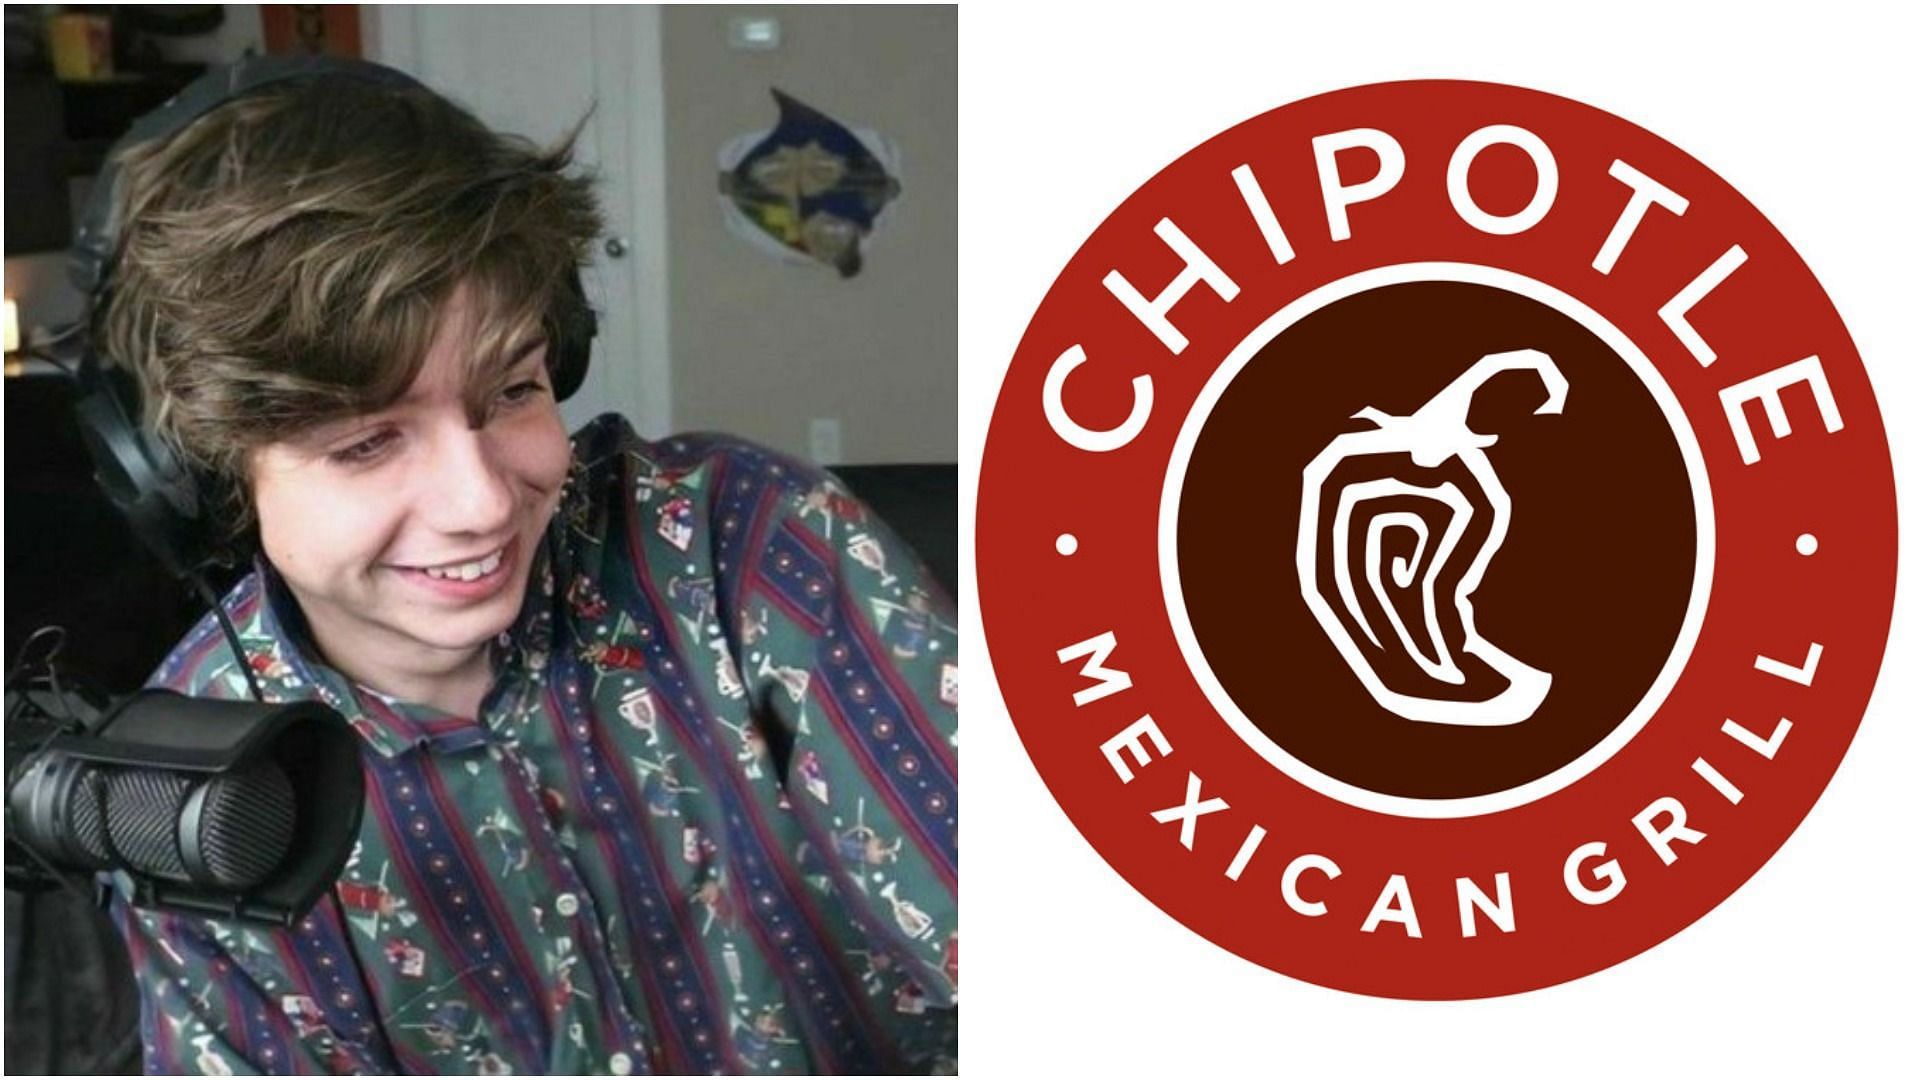 Karl Jacobs and Chipotle team up to offer a new burrito (Image via Sportskeeda)